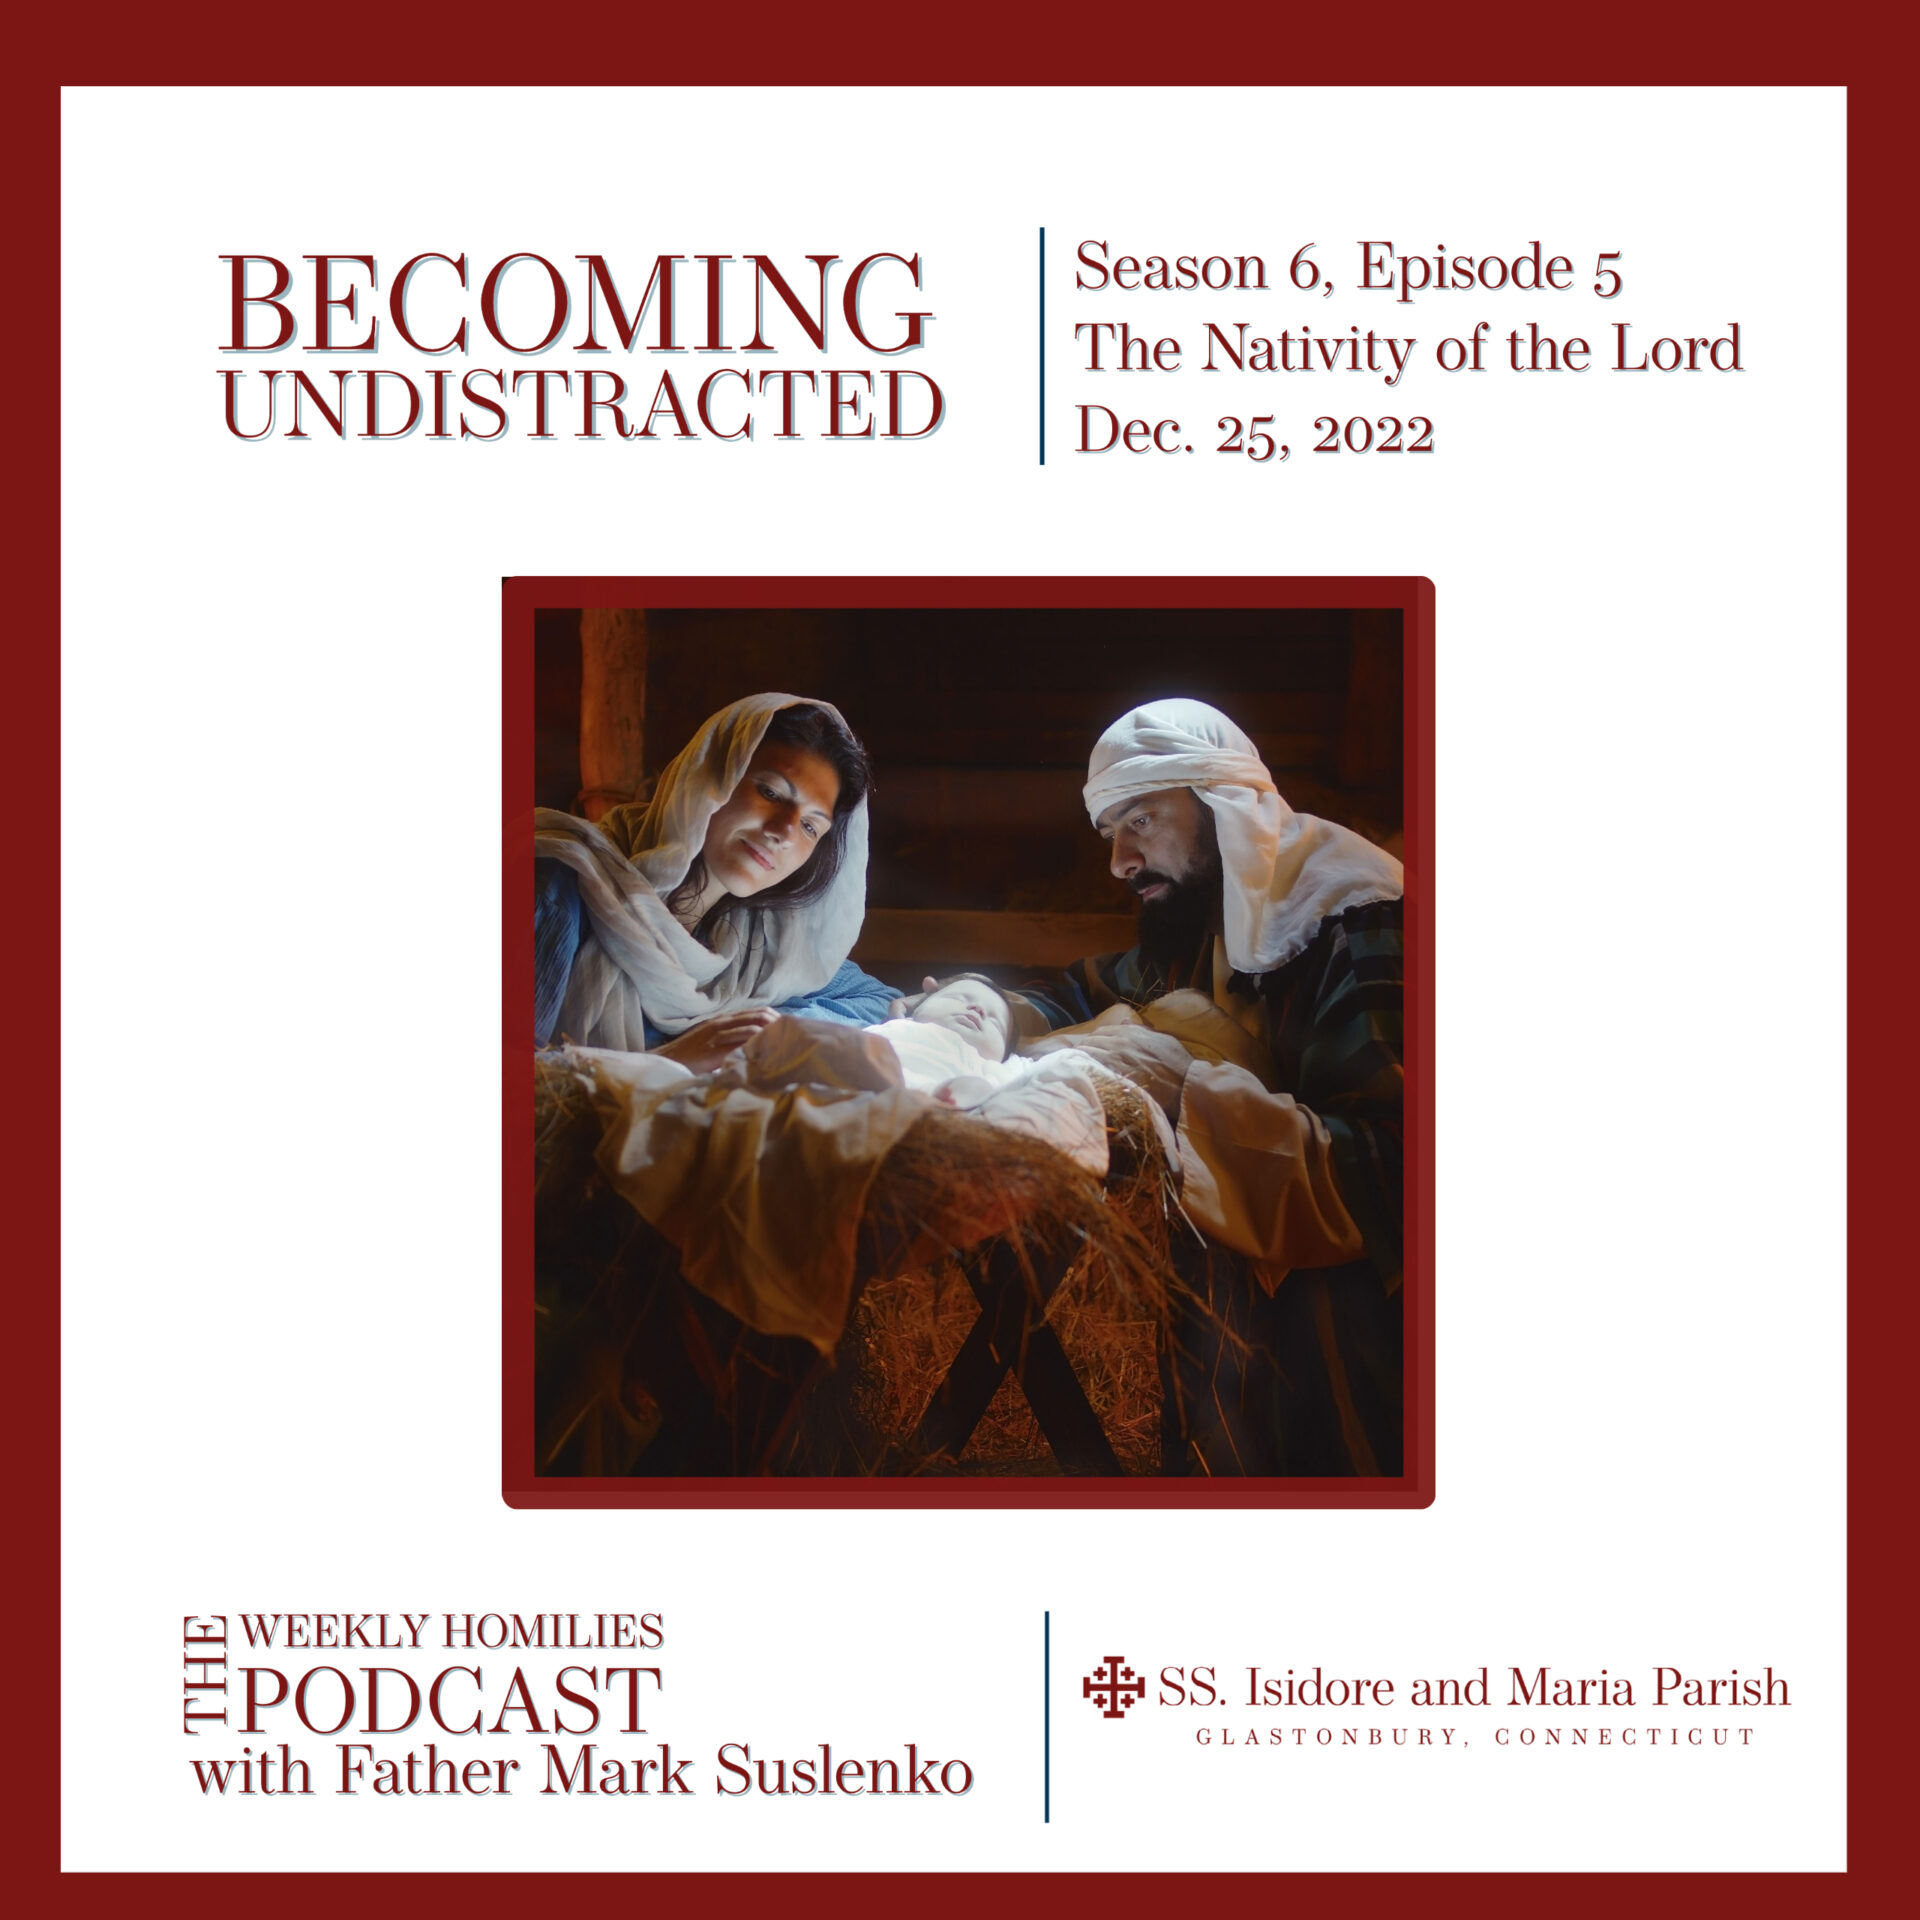 PODCAST: Becoming Undistracted